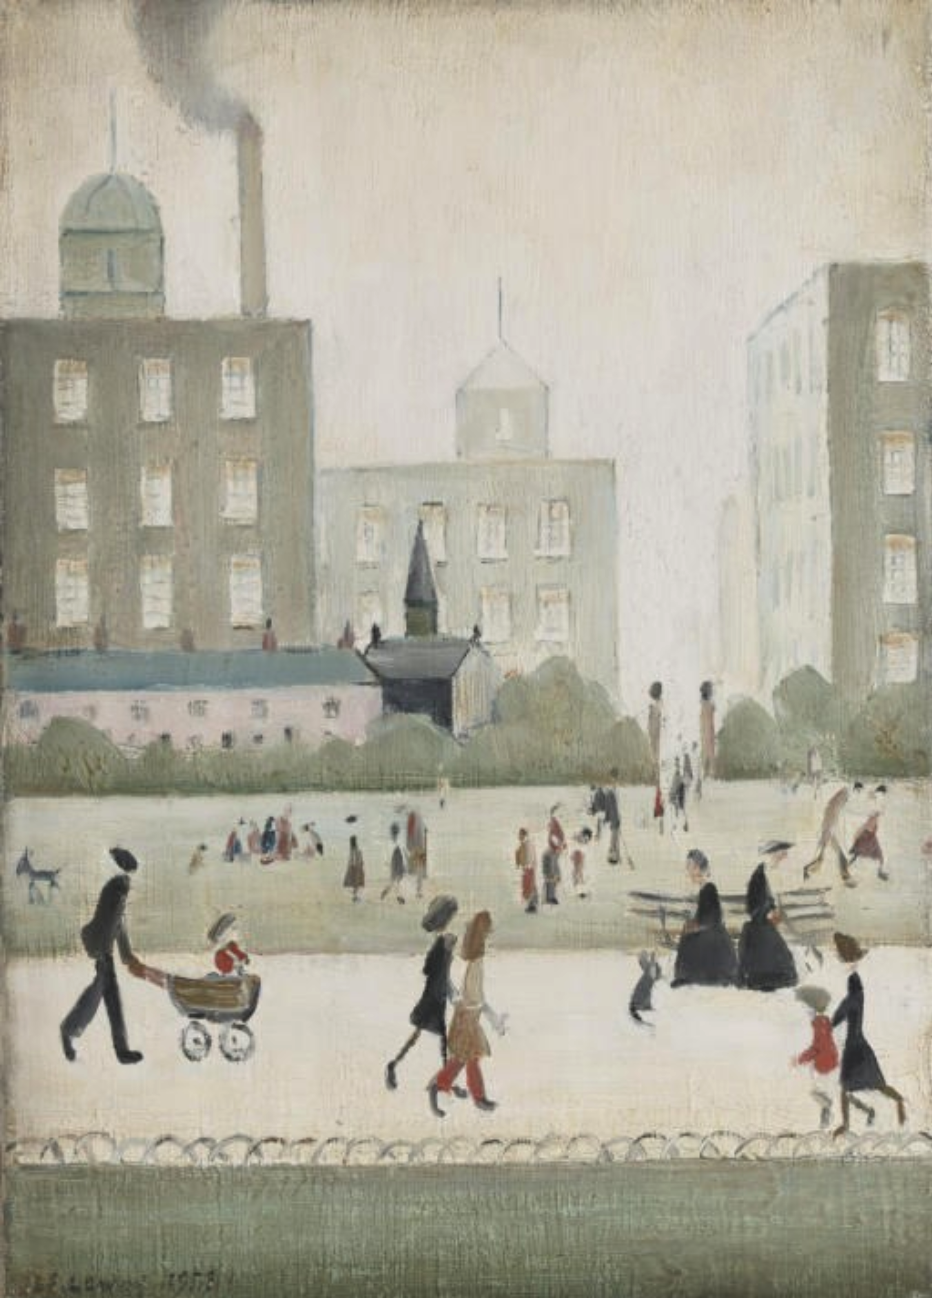 Figures in the Park (1958) by Laurence Stephen Lowry (1887 - 1976), English artist.